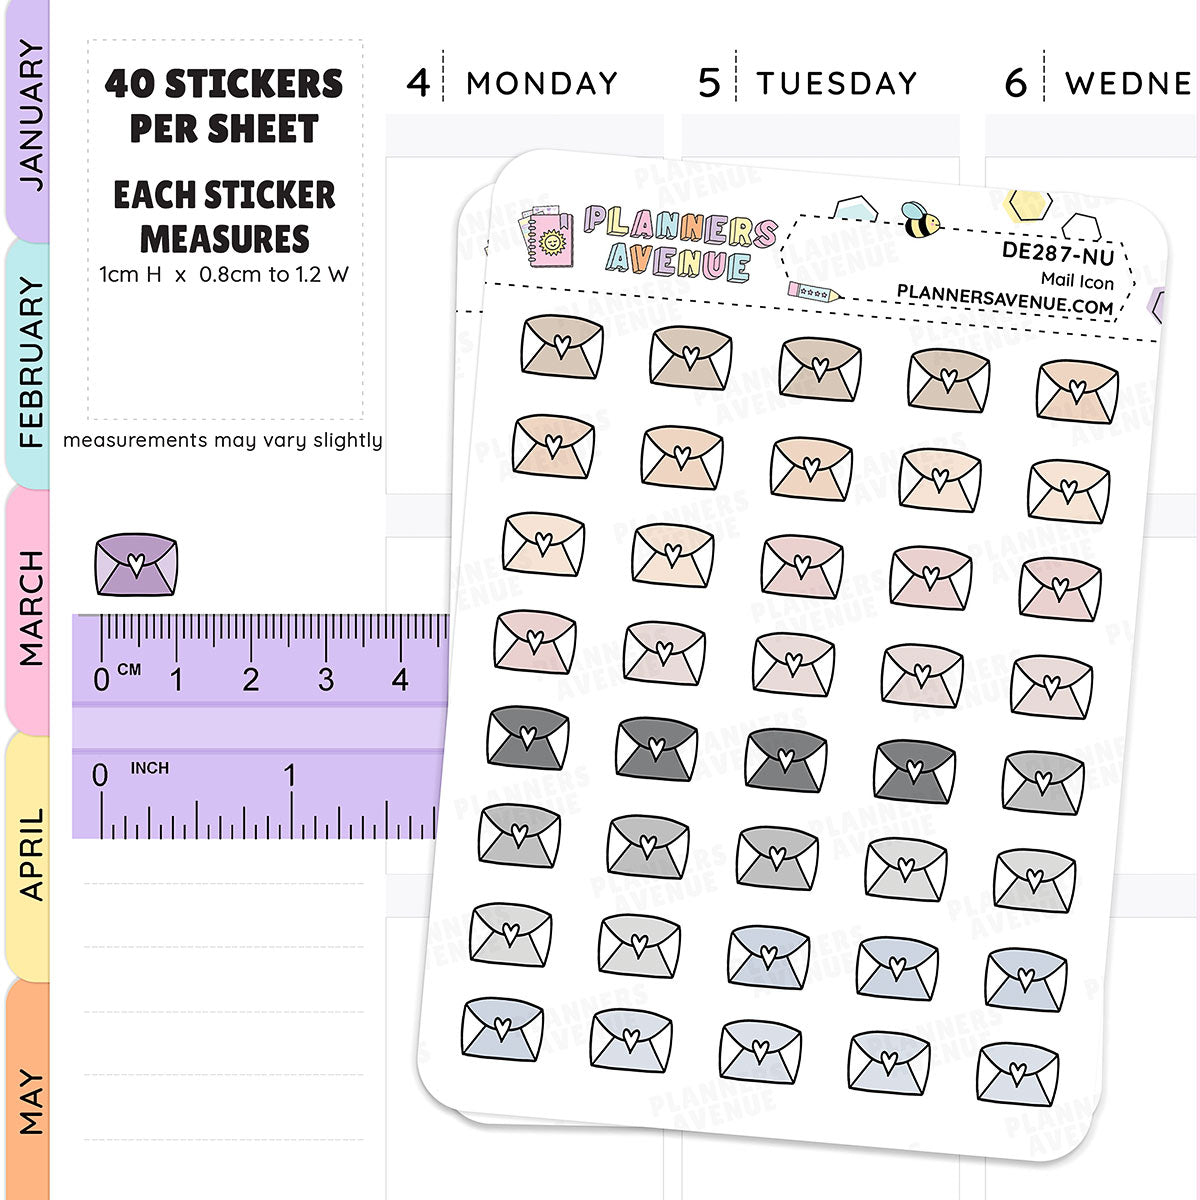 Neutral Mail Mini Icon Planner Stickers